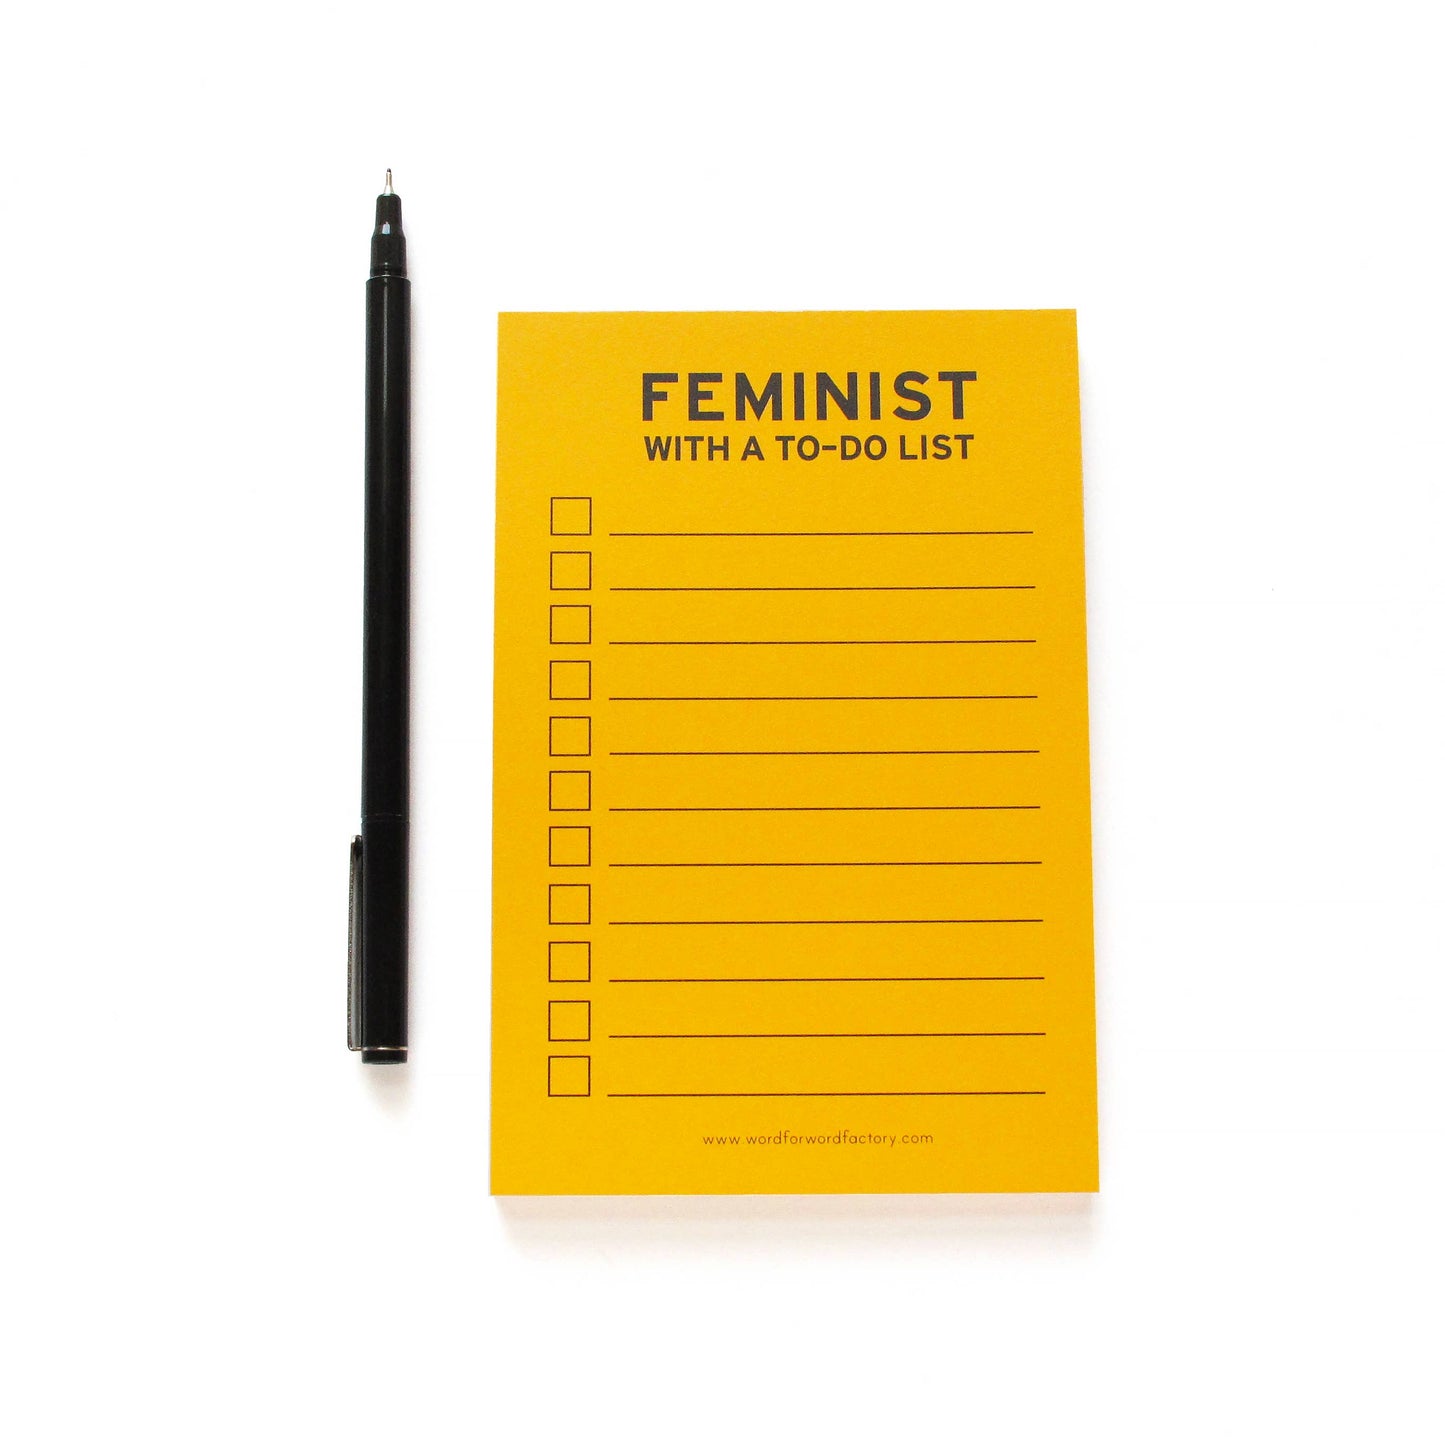 WORD FOR WORD Factory - FEMINIST WITH A TO-DO LIST Notepad Checklist